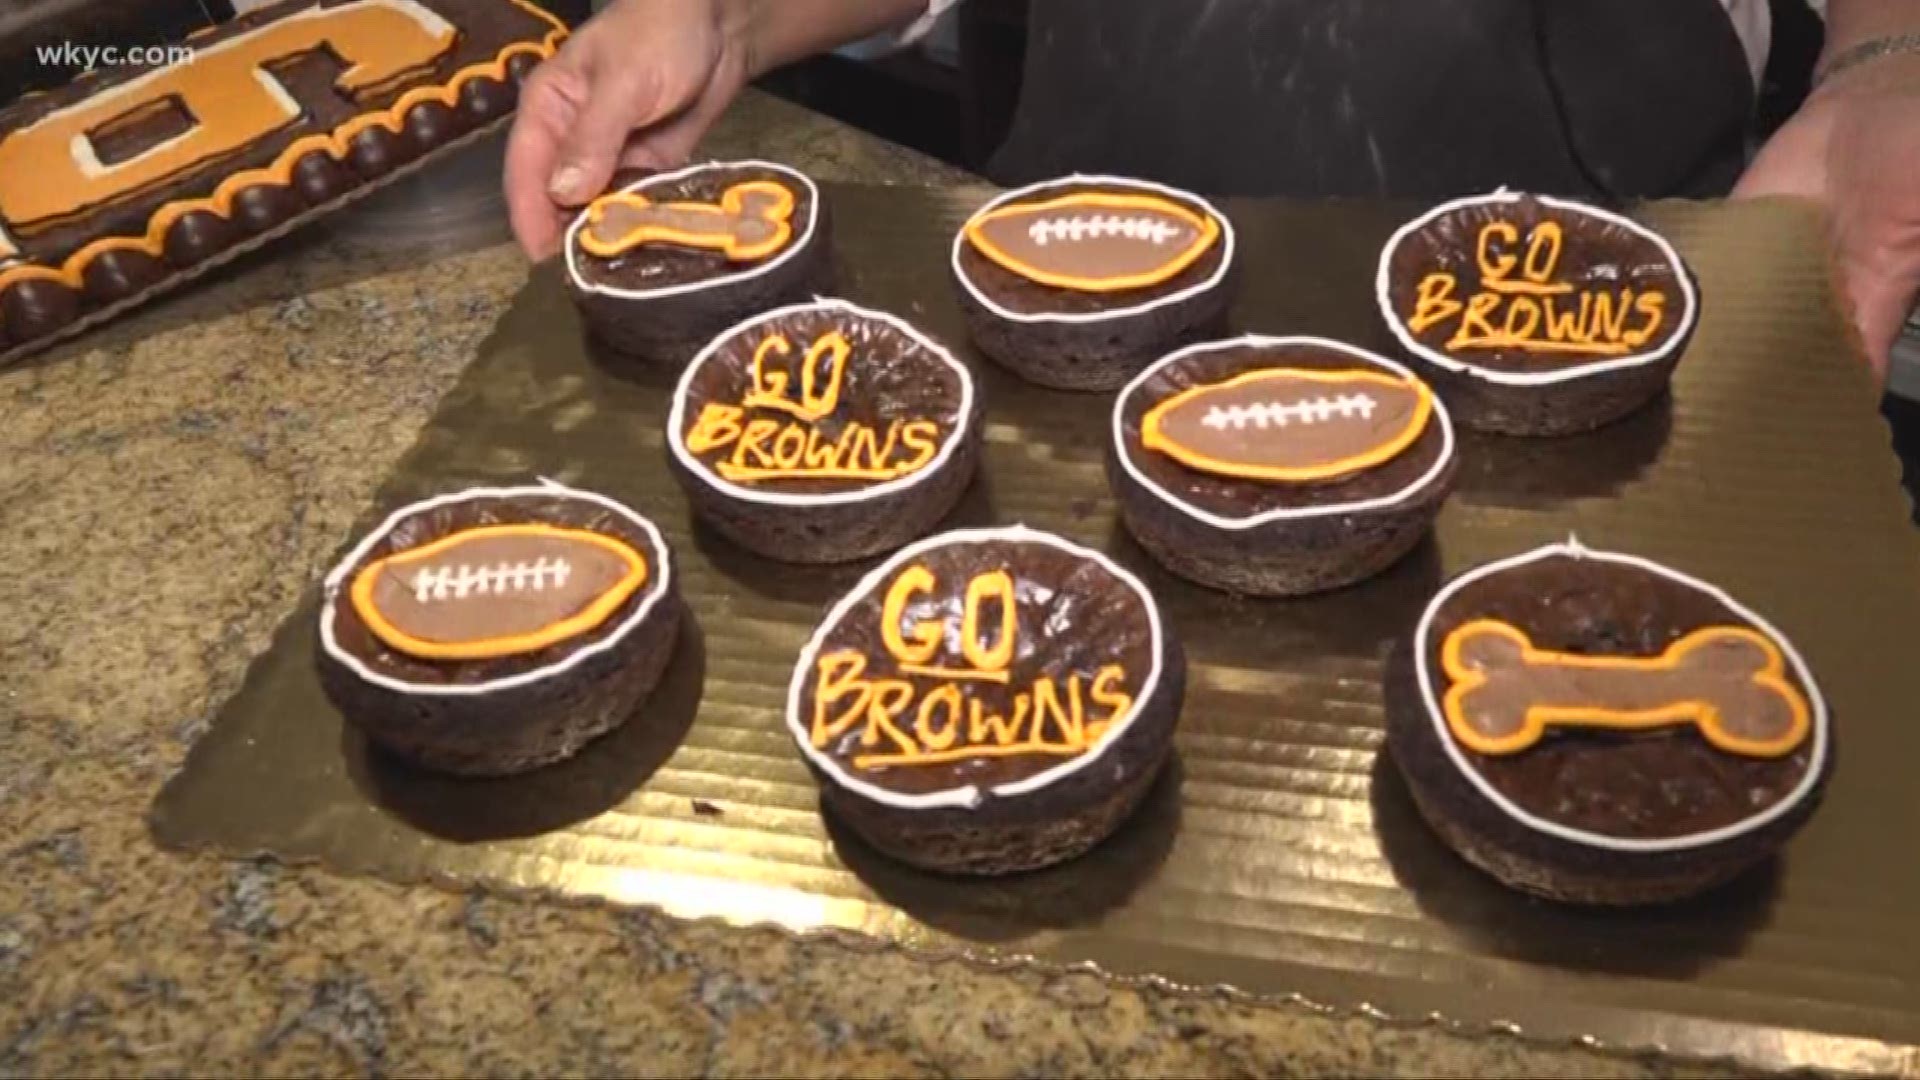 September 2019: We woke up feeling dangerous, so we wanted to spend our morning with a baker in Mayfield Heights to cook up some brownies in honor of the Cleveland Browns. WKYC's Jasmine Monroe dropped by Casa Dolce for this special football treat.